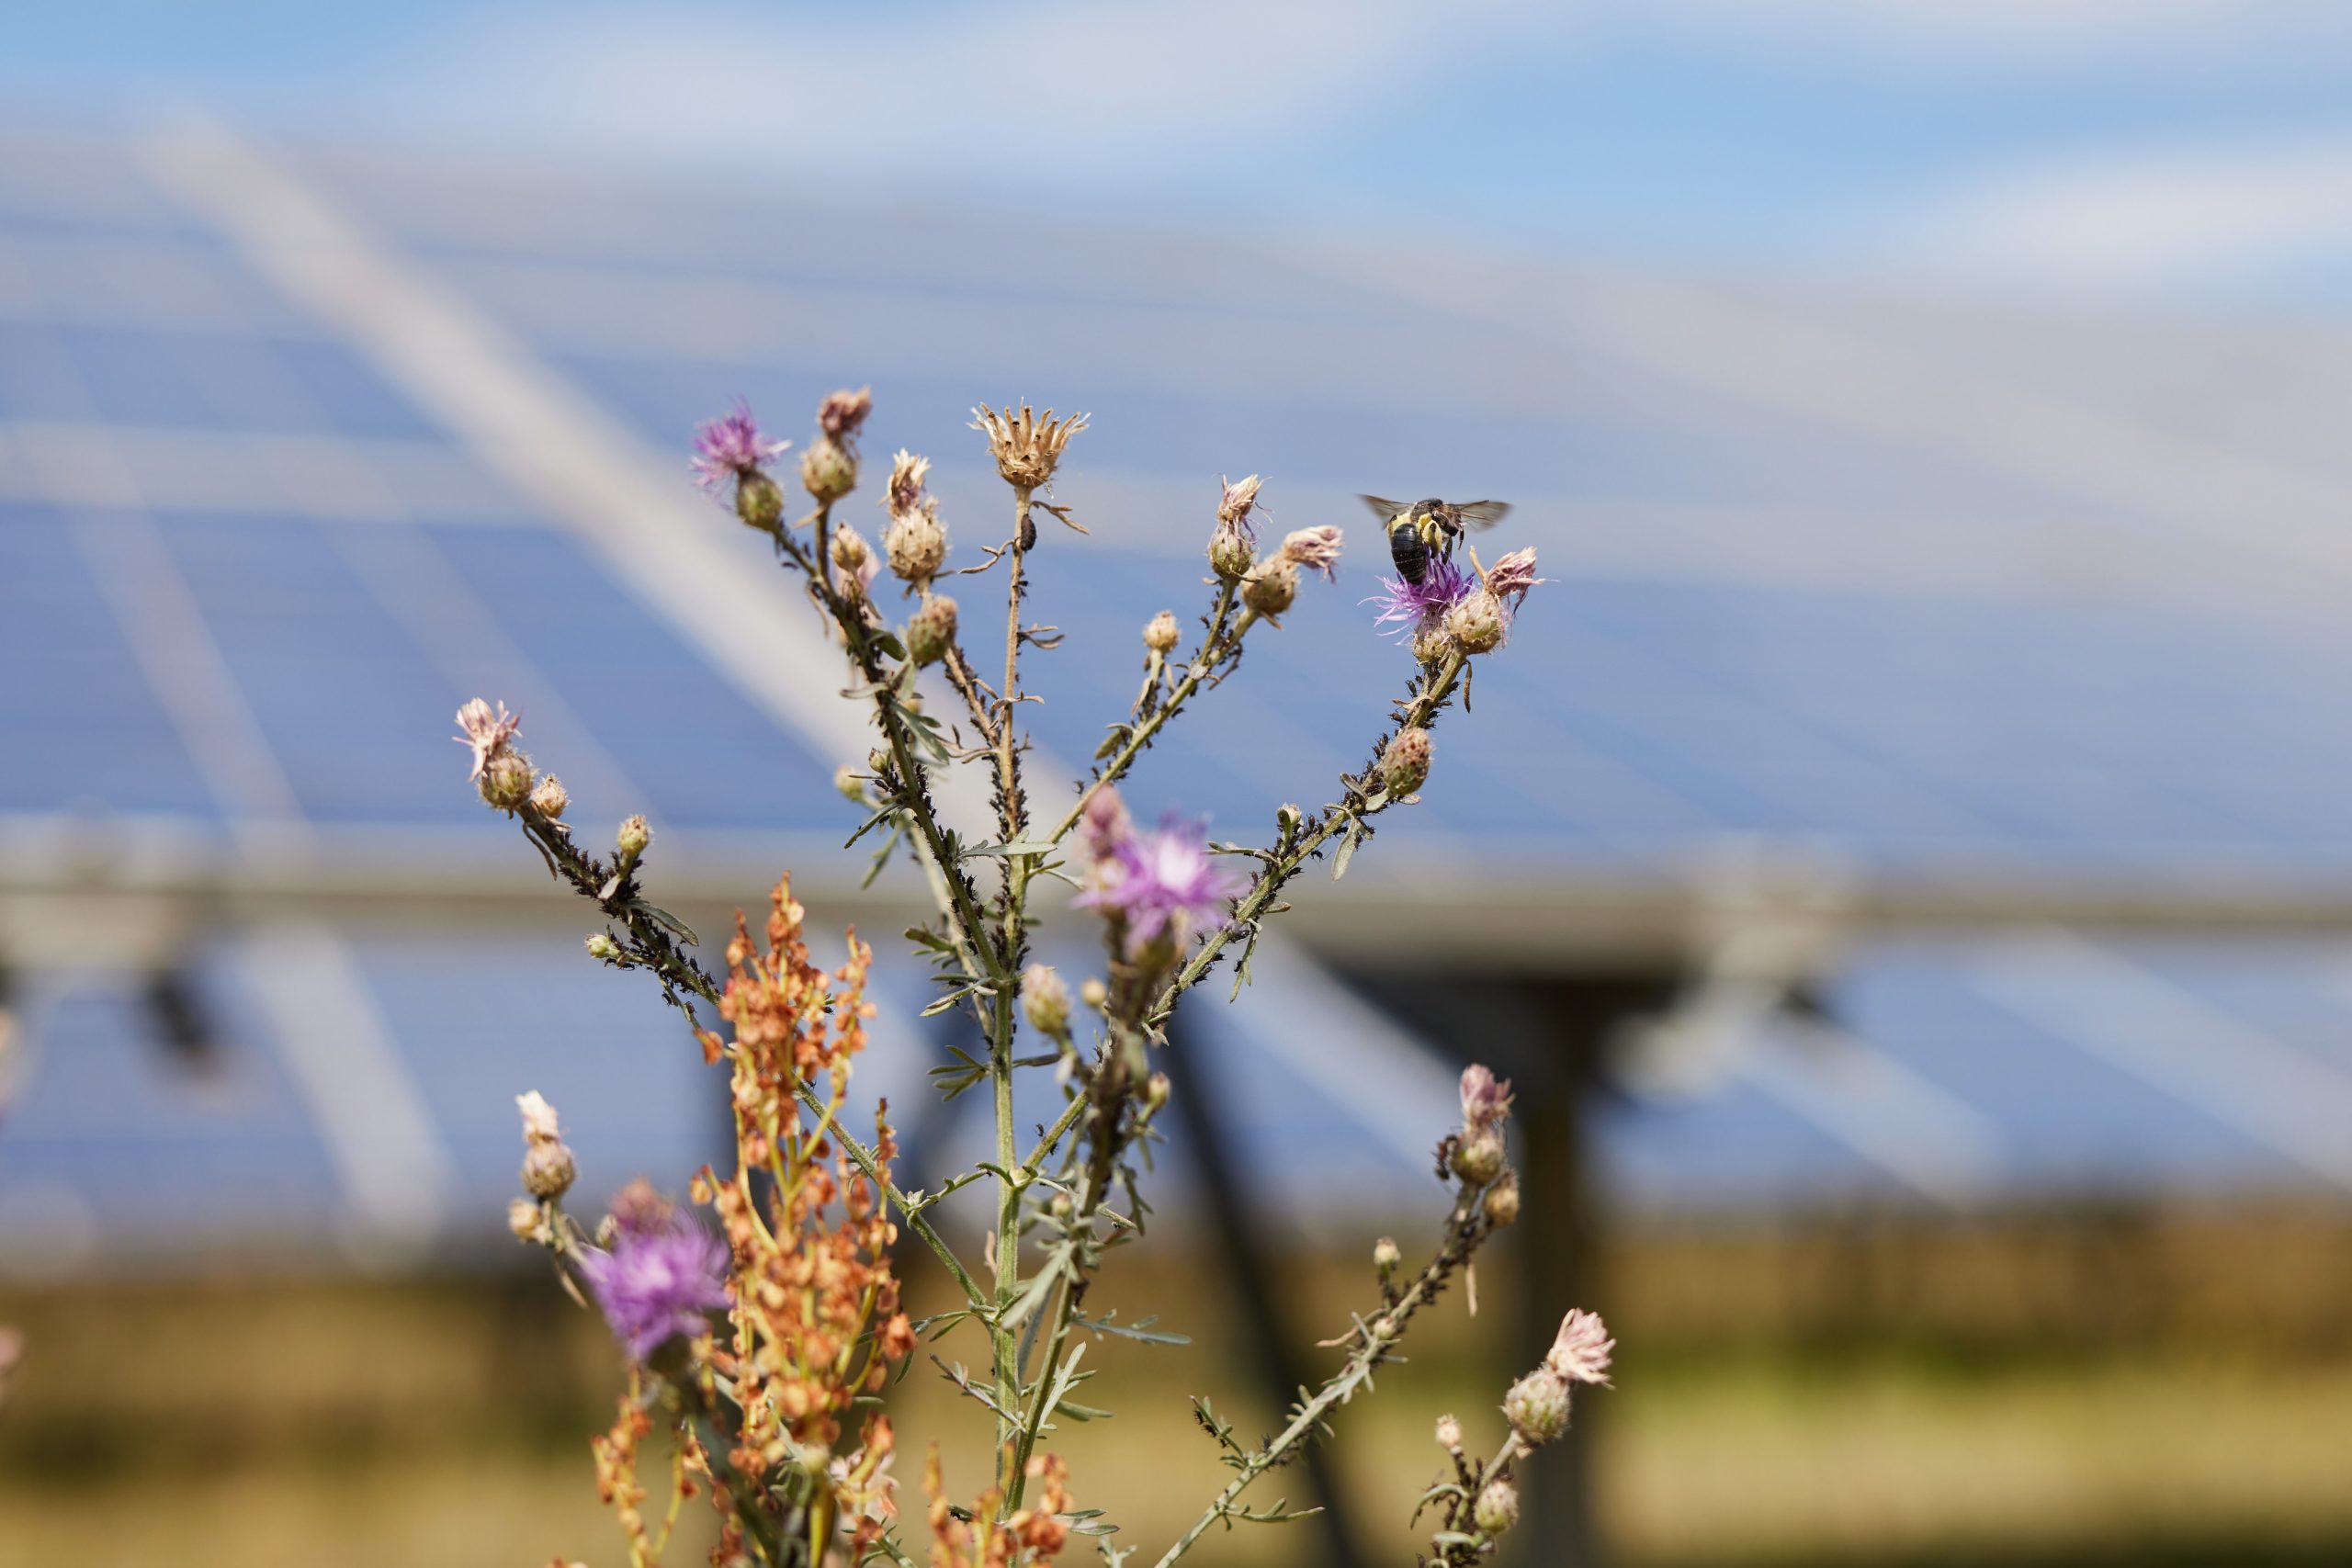 Solar panels with wildflowers and bees.